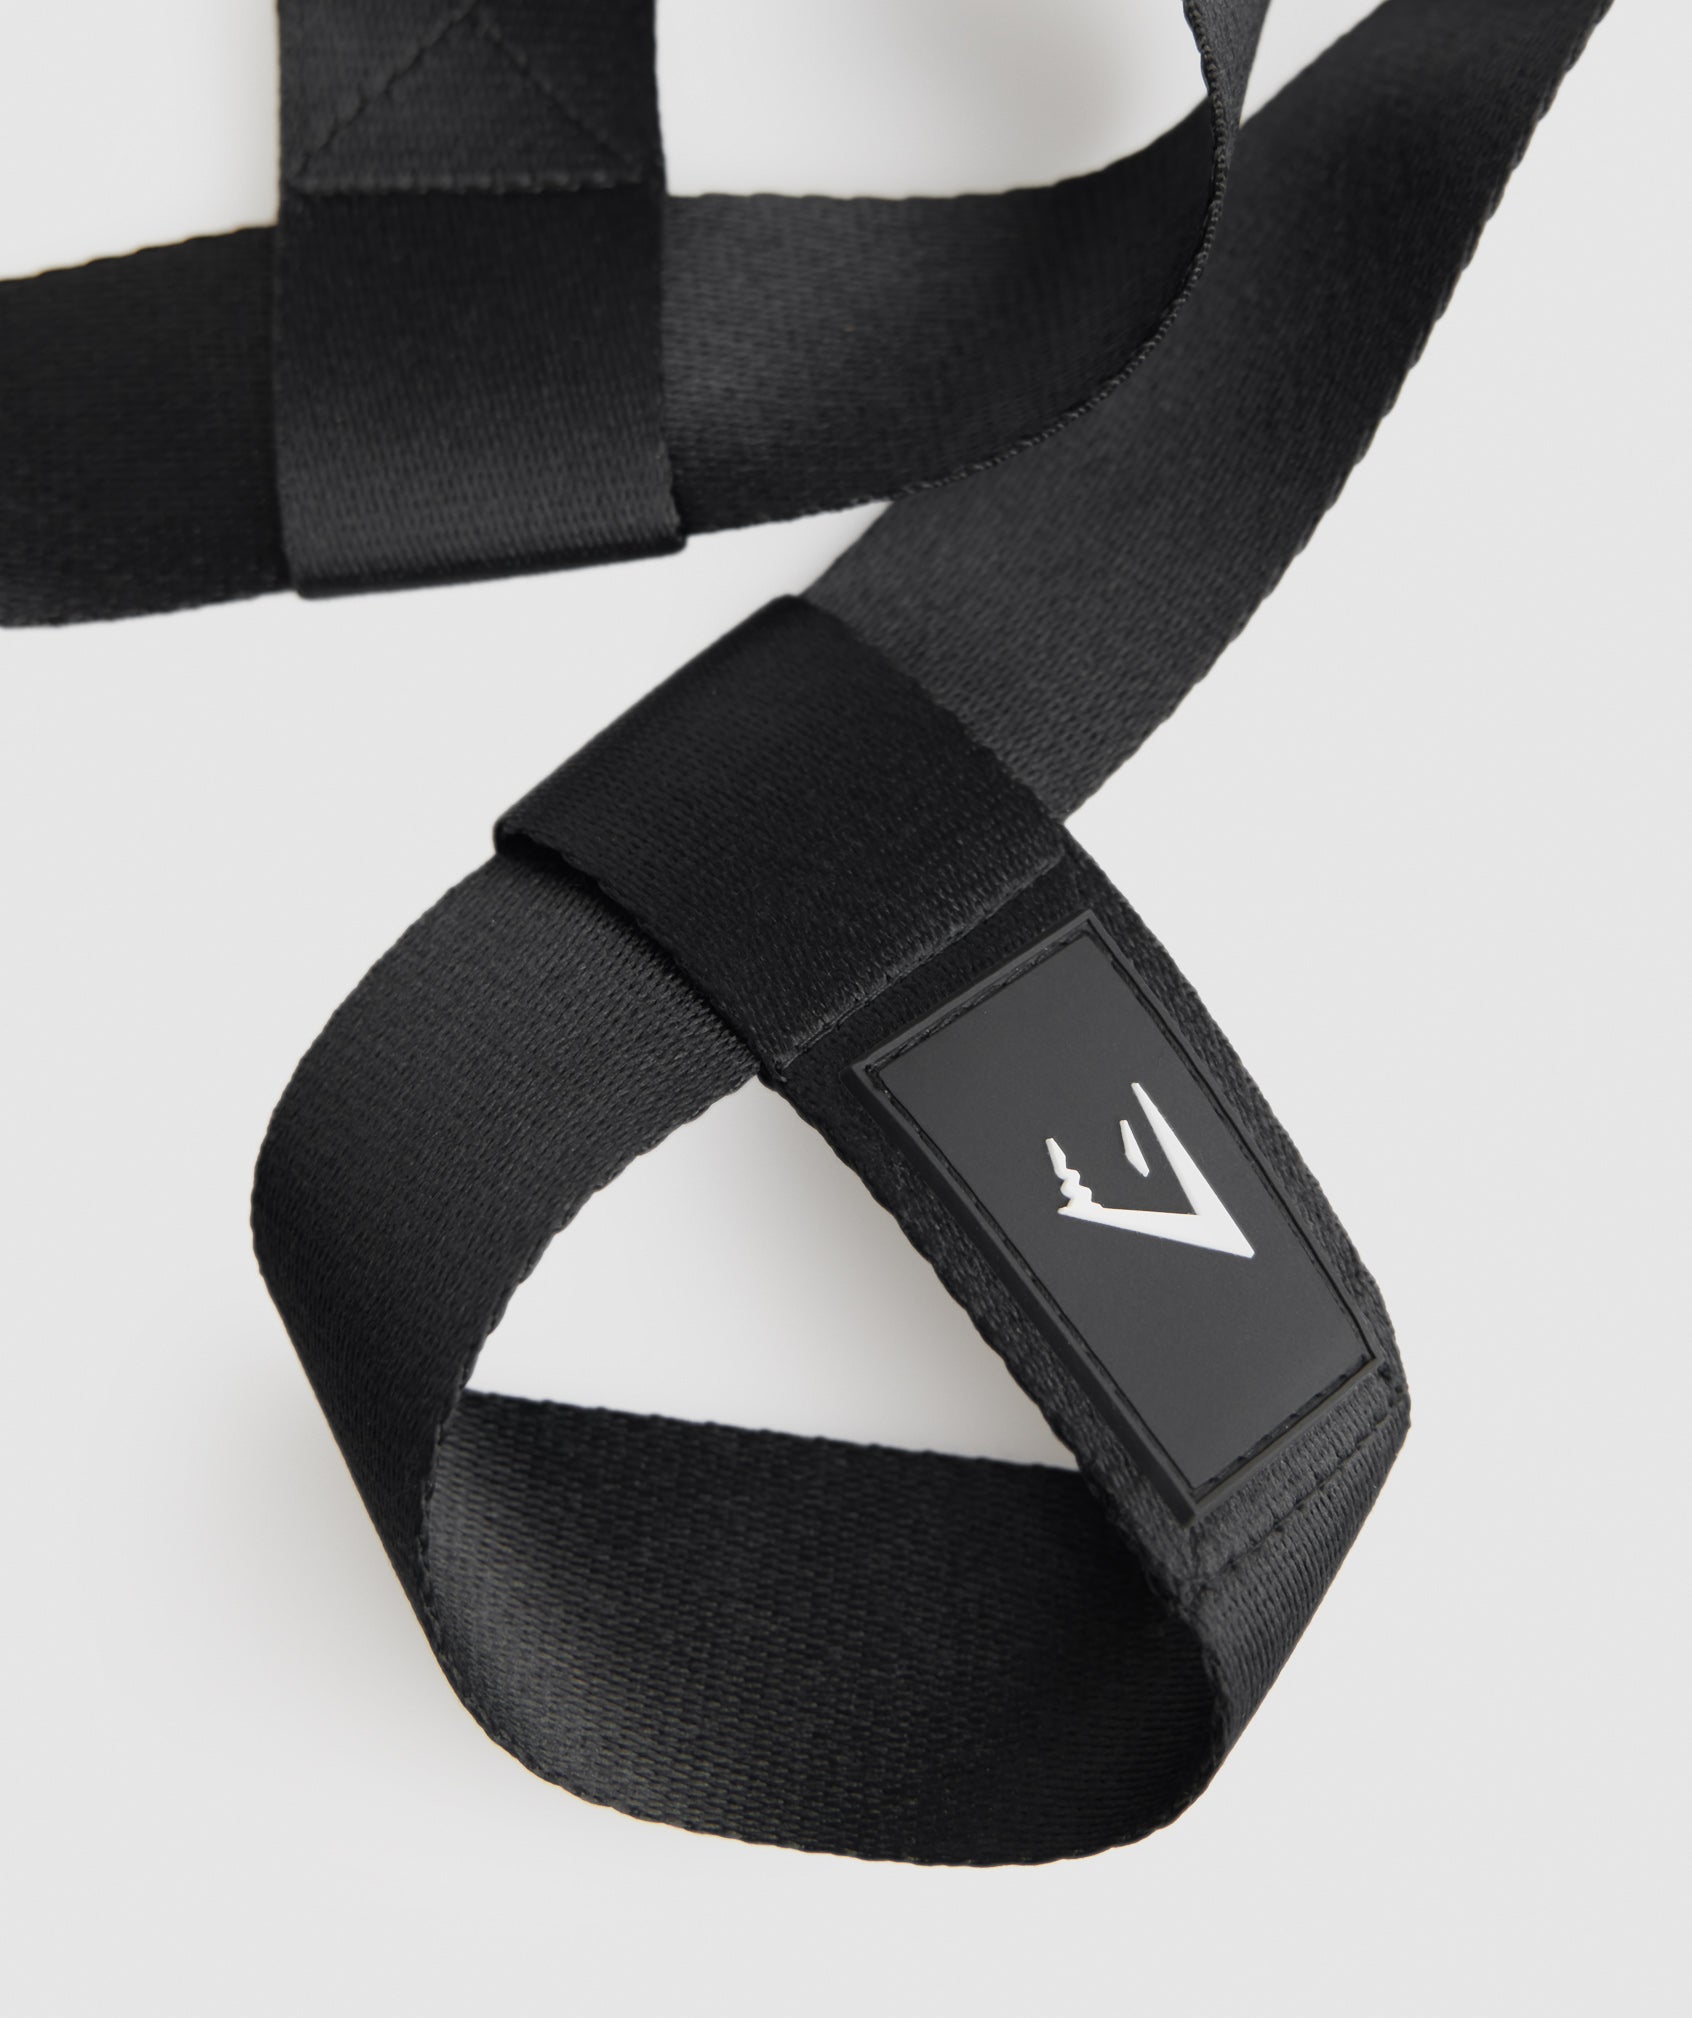 Studio Mat Strap and Band in Black - view 4